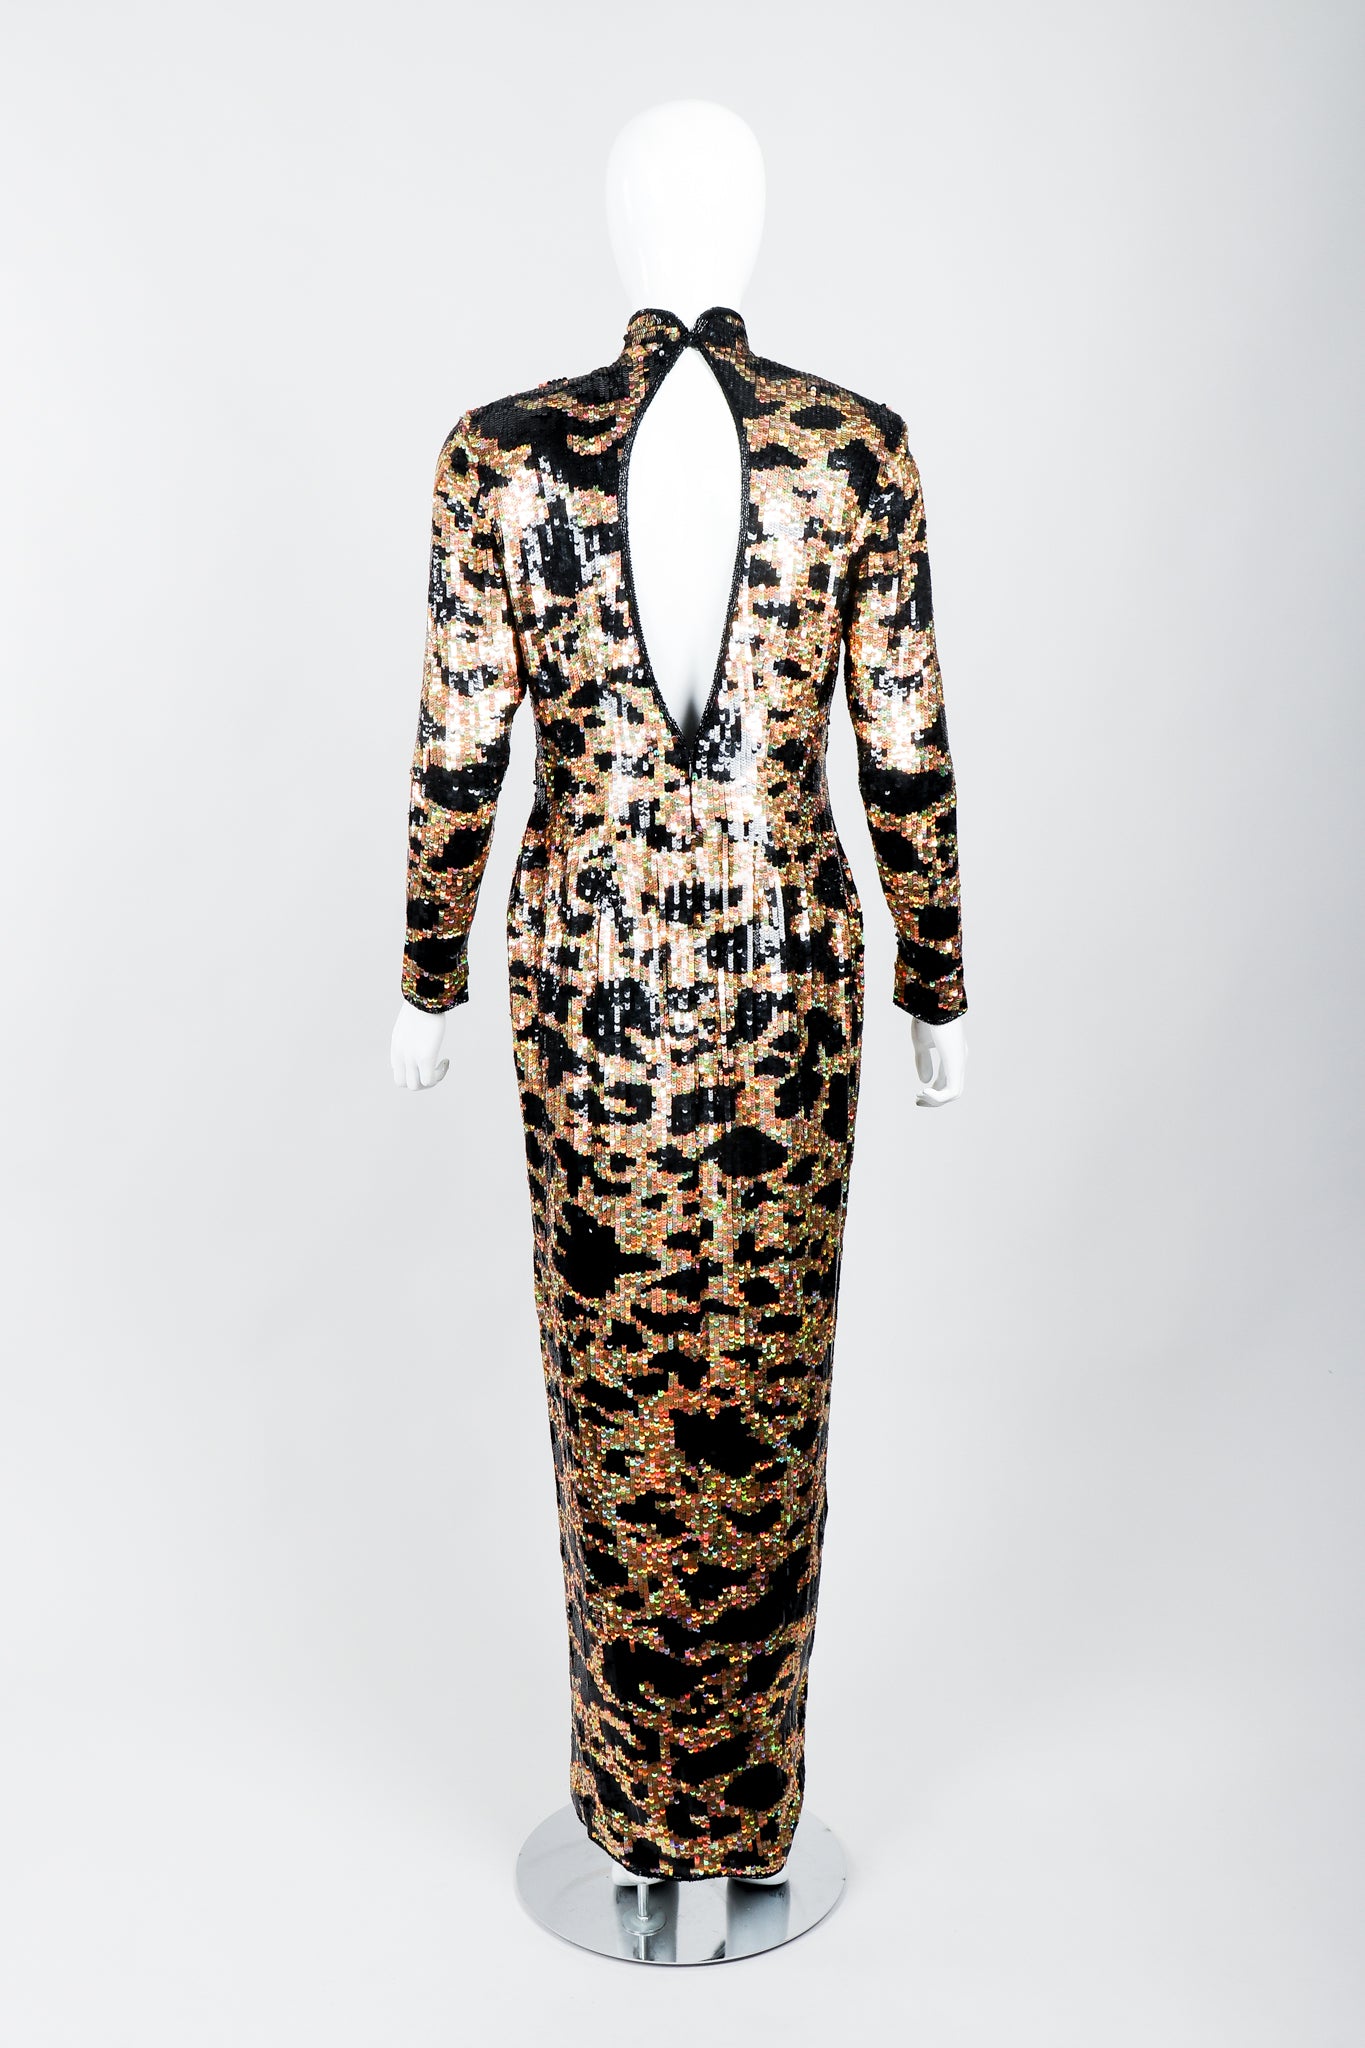 Vintage Riazee for Lillie Rubin Holographic Sequin Animal Sheath Dress on Mannequin back at Recess